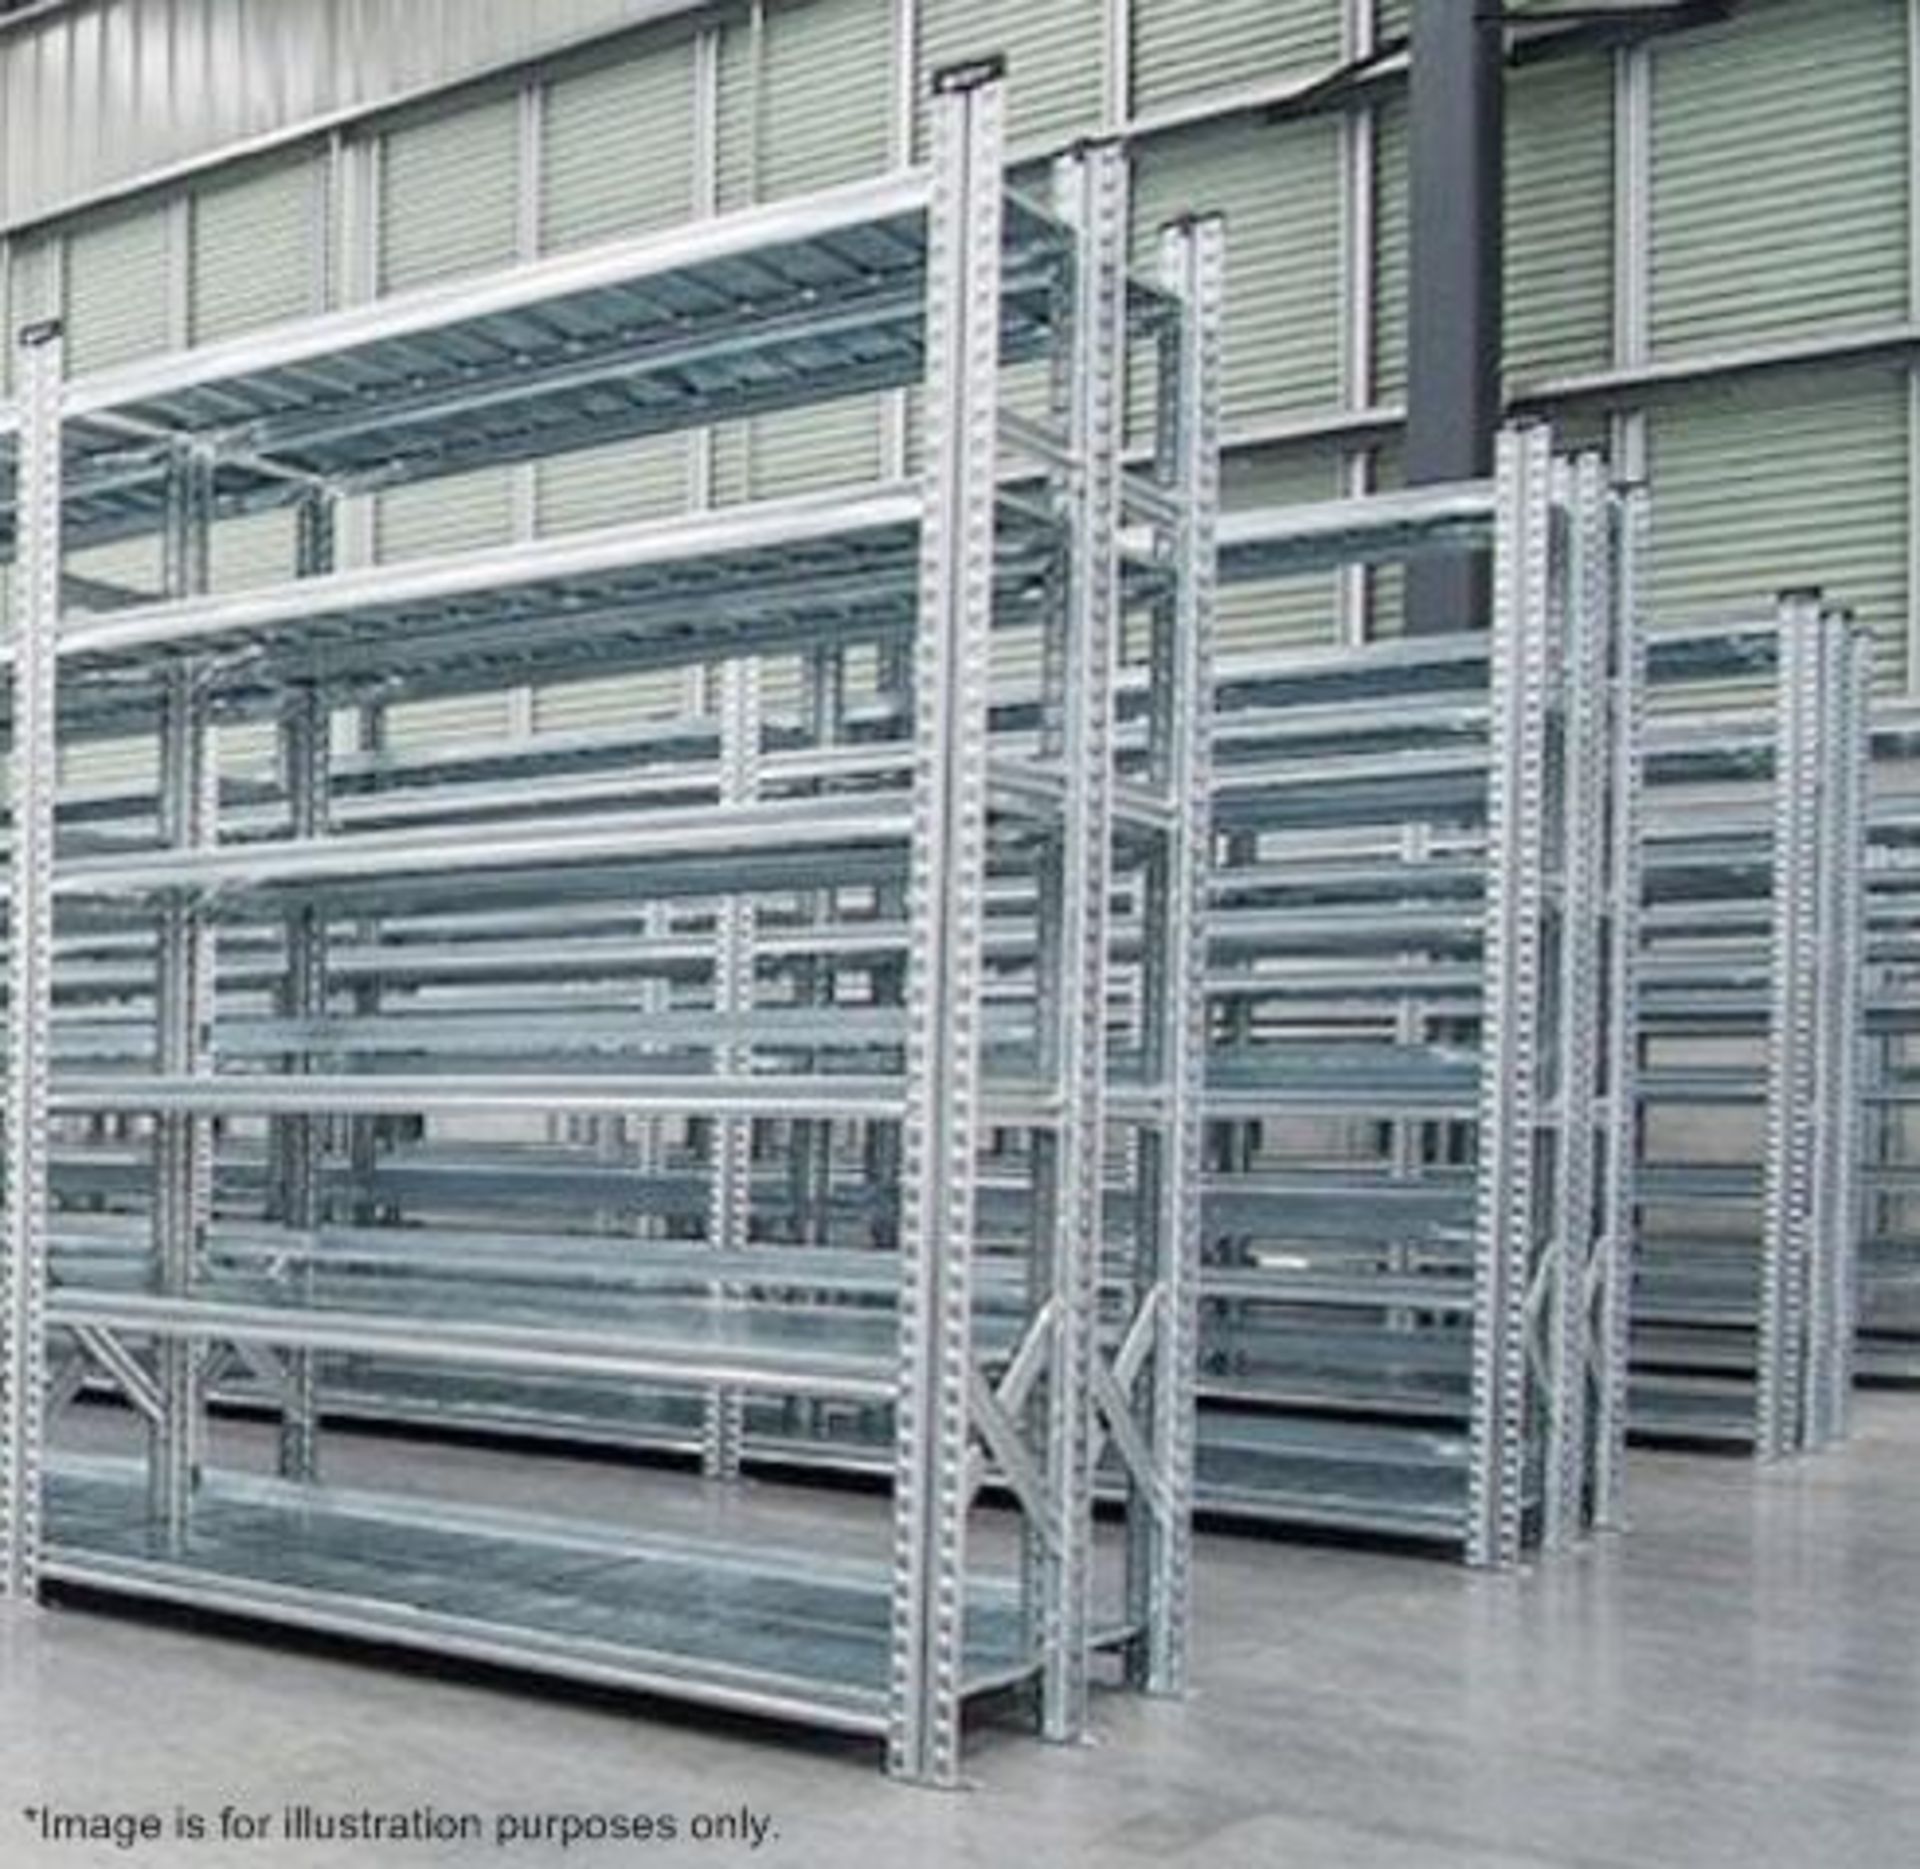 4 x Bays of Metalsistem Steel Modular Storage Shelving - Includes 29 Pieces - Recently Removed - Image 2 of 17